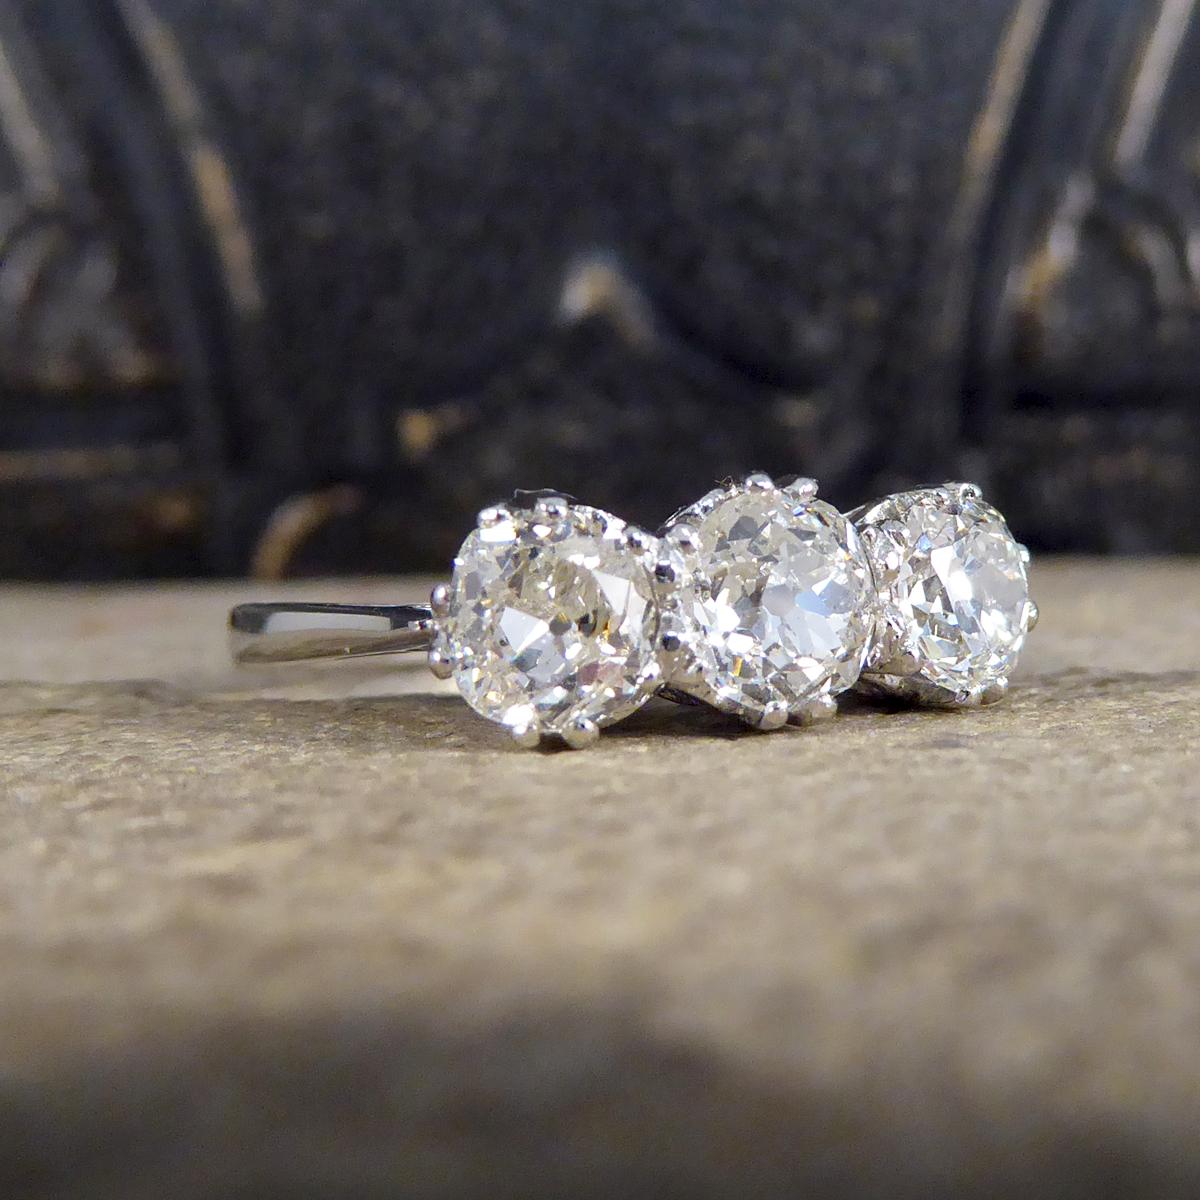 An absolutely gorgeous and sparkly Diamond three stone ring holding three Old Cut Diamonds set in a secure Platinum double claw setting. With a total of 1.70ct Diamonds and a beautifully detailed gallery this ring would such a lovely gift and can be